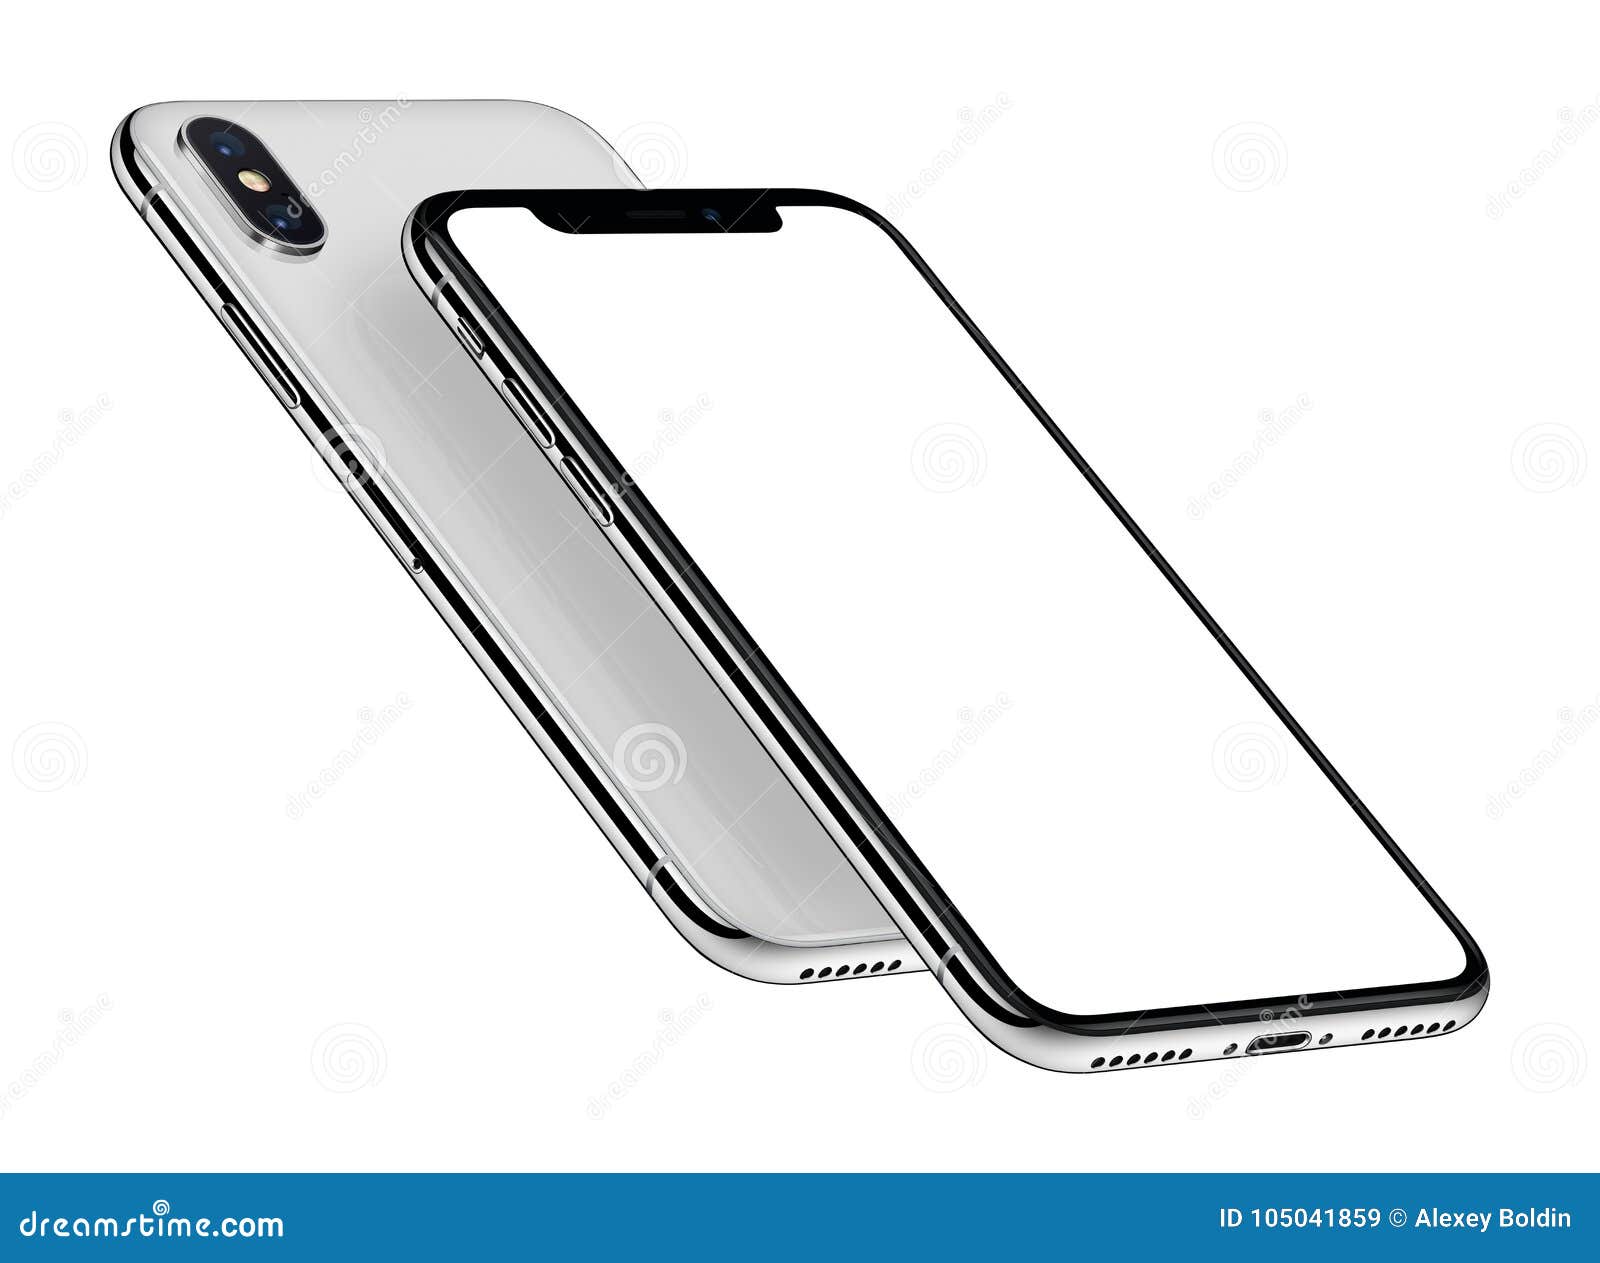 Download White Isometric Smartphones Similar To IPhone X Mockup ...